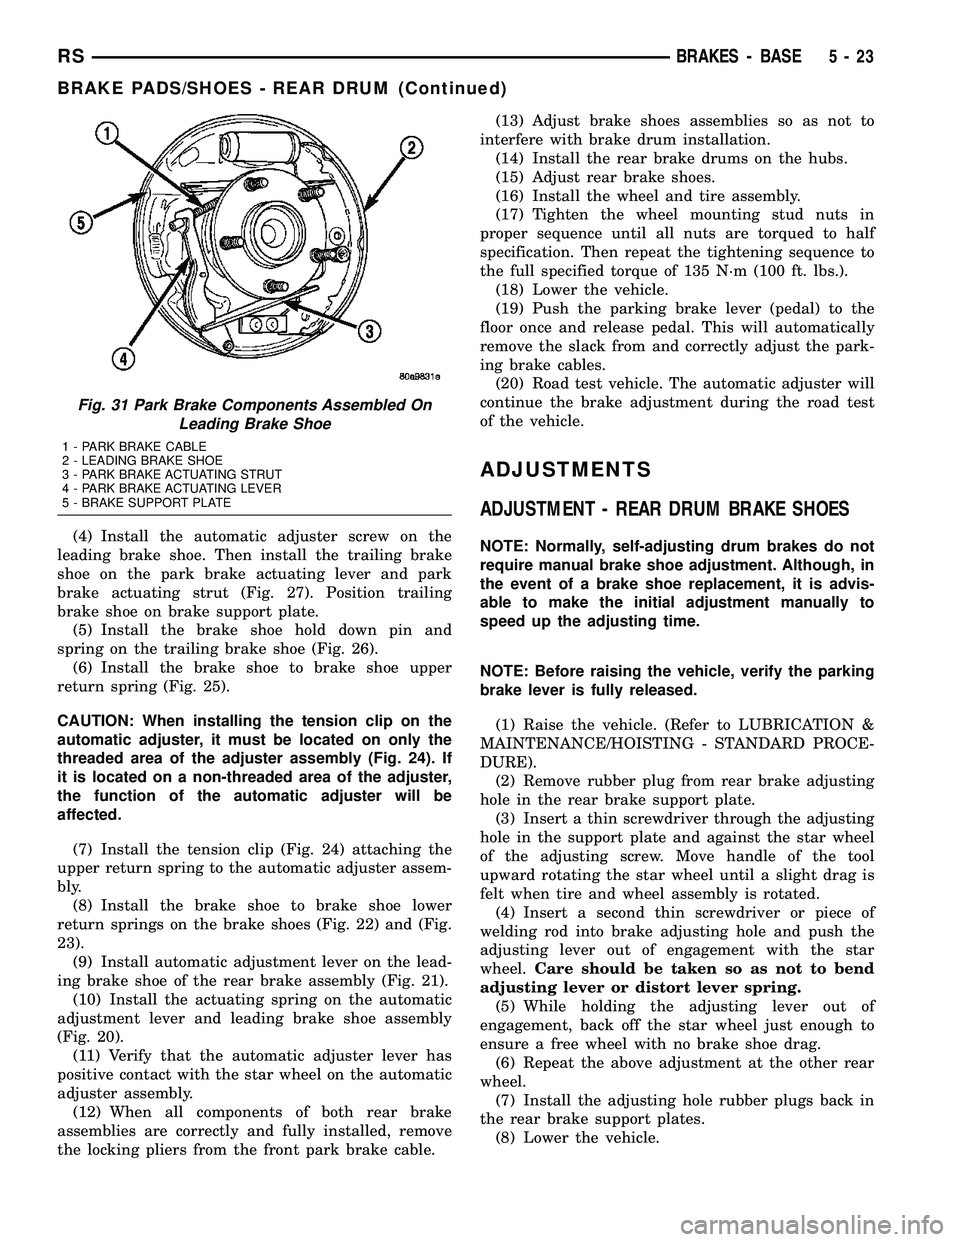 DODGE TOWN AND COUNTRY 2004  Service Manual (4) Install the automatic adjuster screw on the
leading brake shoe. Then install the trailing brake
shoe on the park brake actuating lever and park
brake actuating strut (Fig. 27). Position trailing
b